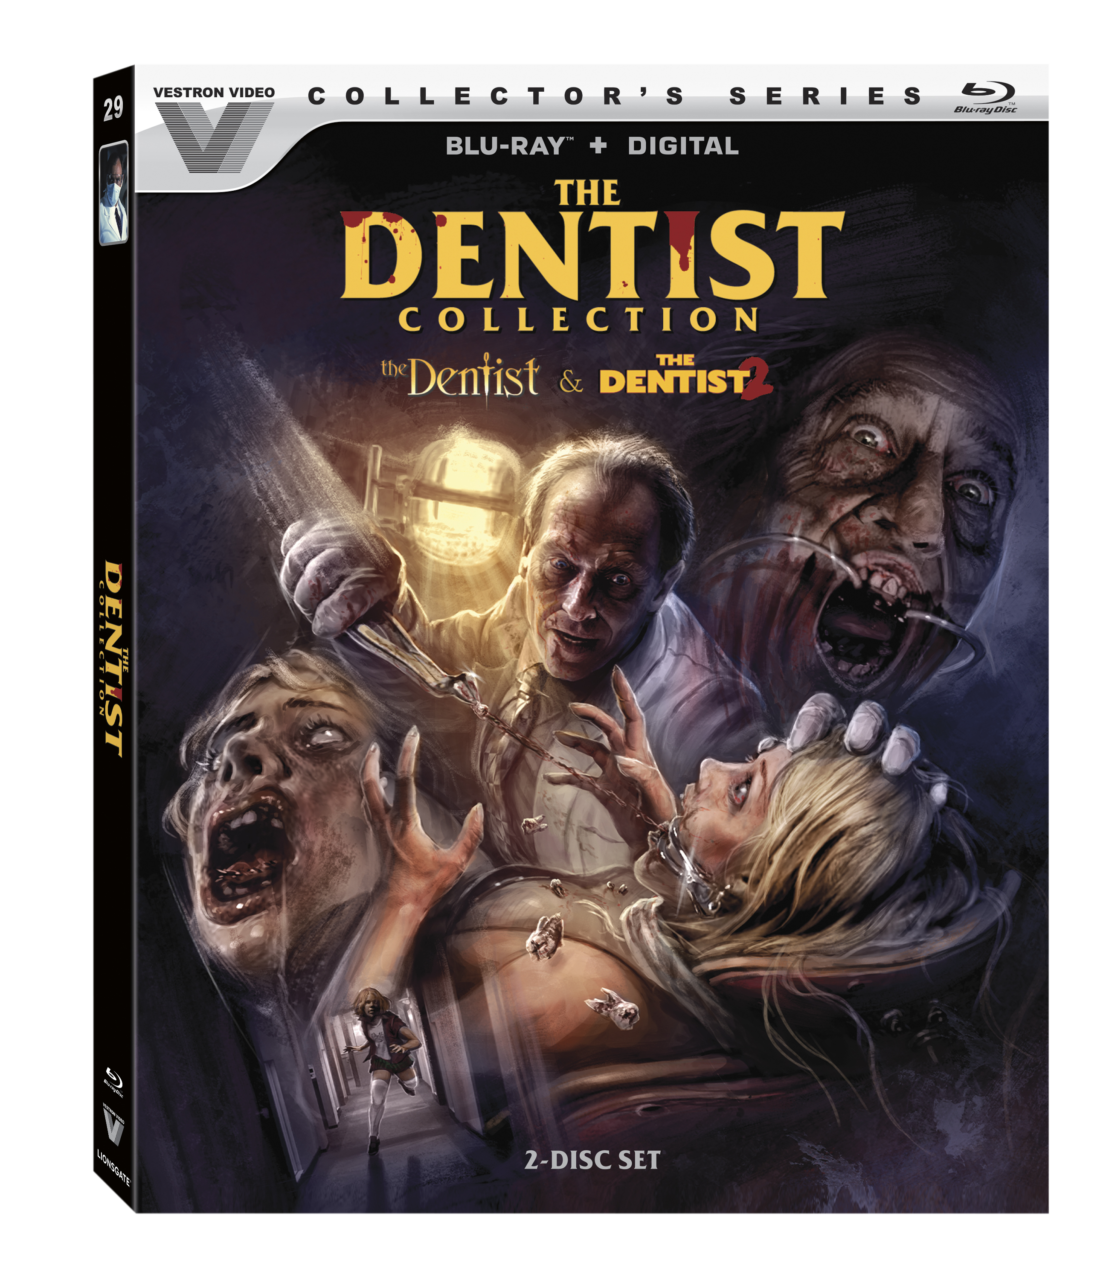 The Dentist Collection Collector's Series cover (Lionsgate)